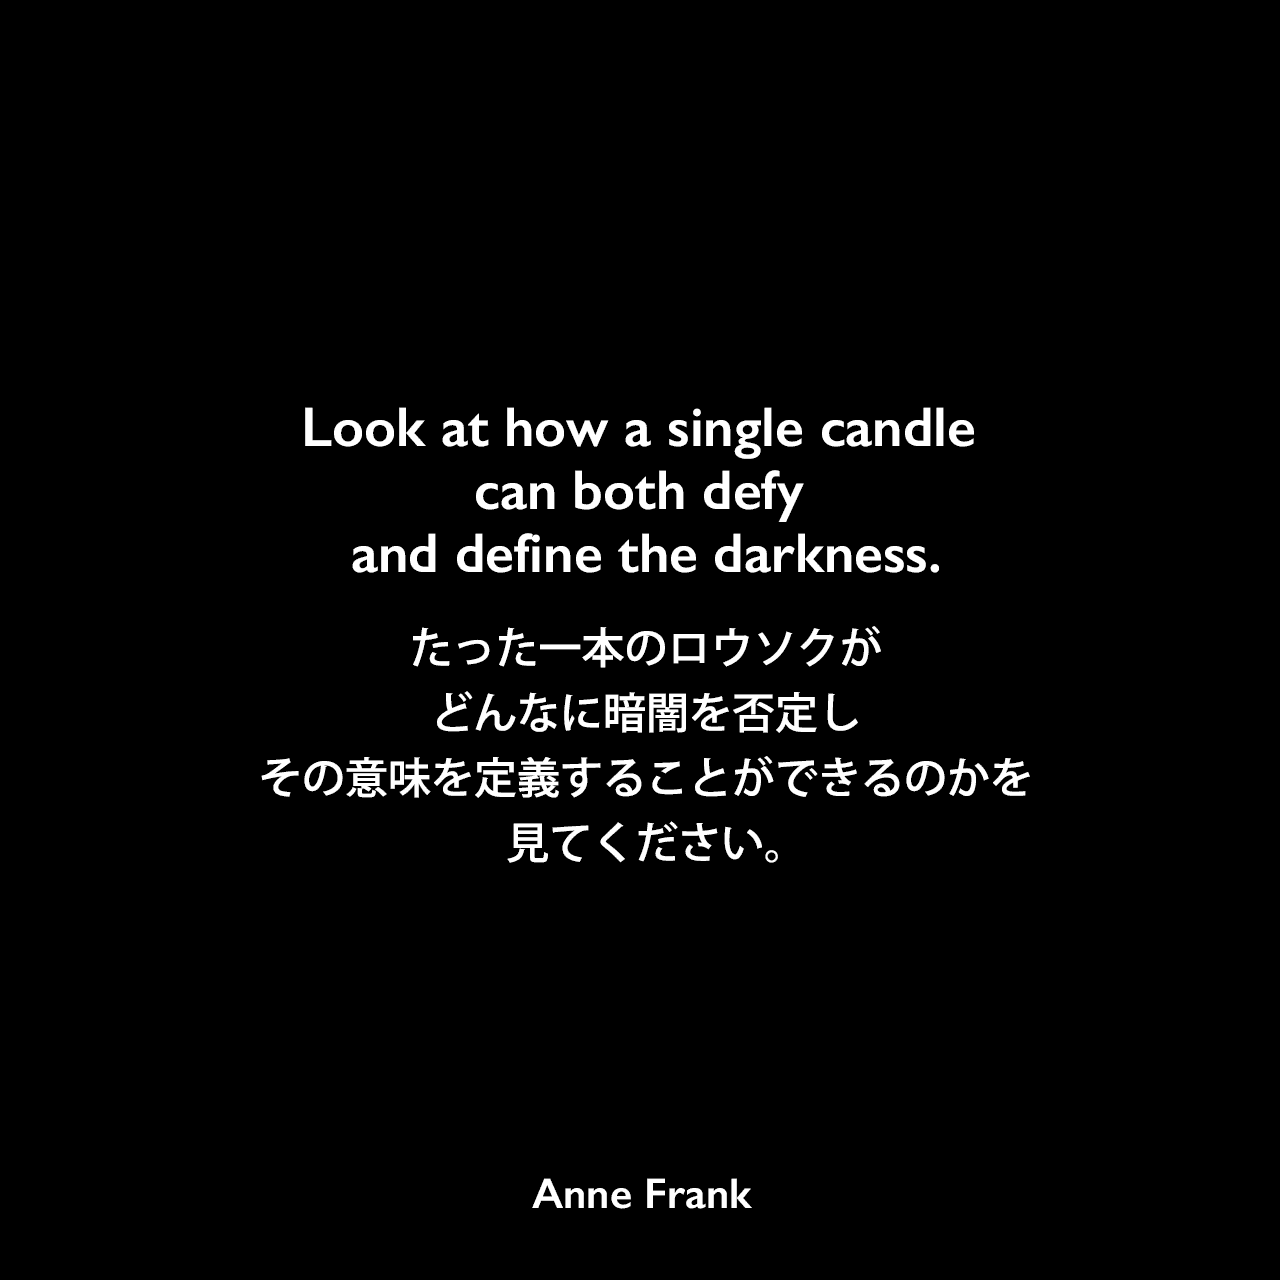 Look at how a single candle can both defy and define the darkness.たった一本のロウソクがどんなに暗闇を否定し、その意味を定義することができるのかを見てください。